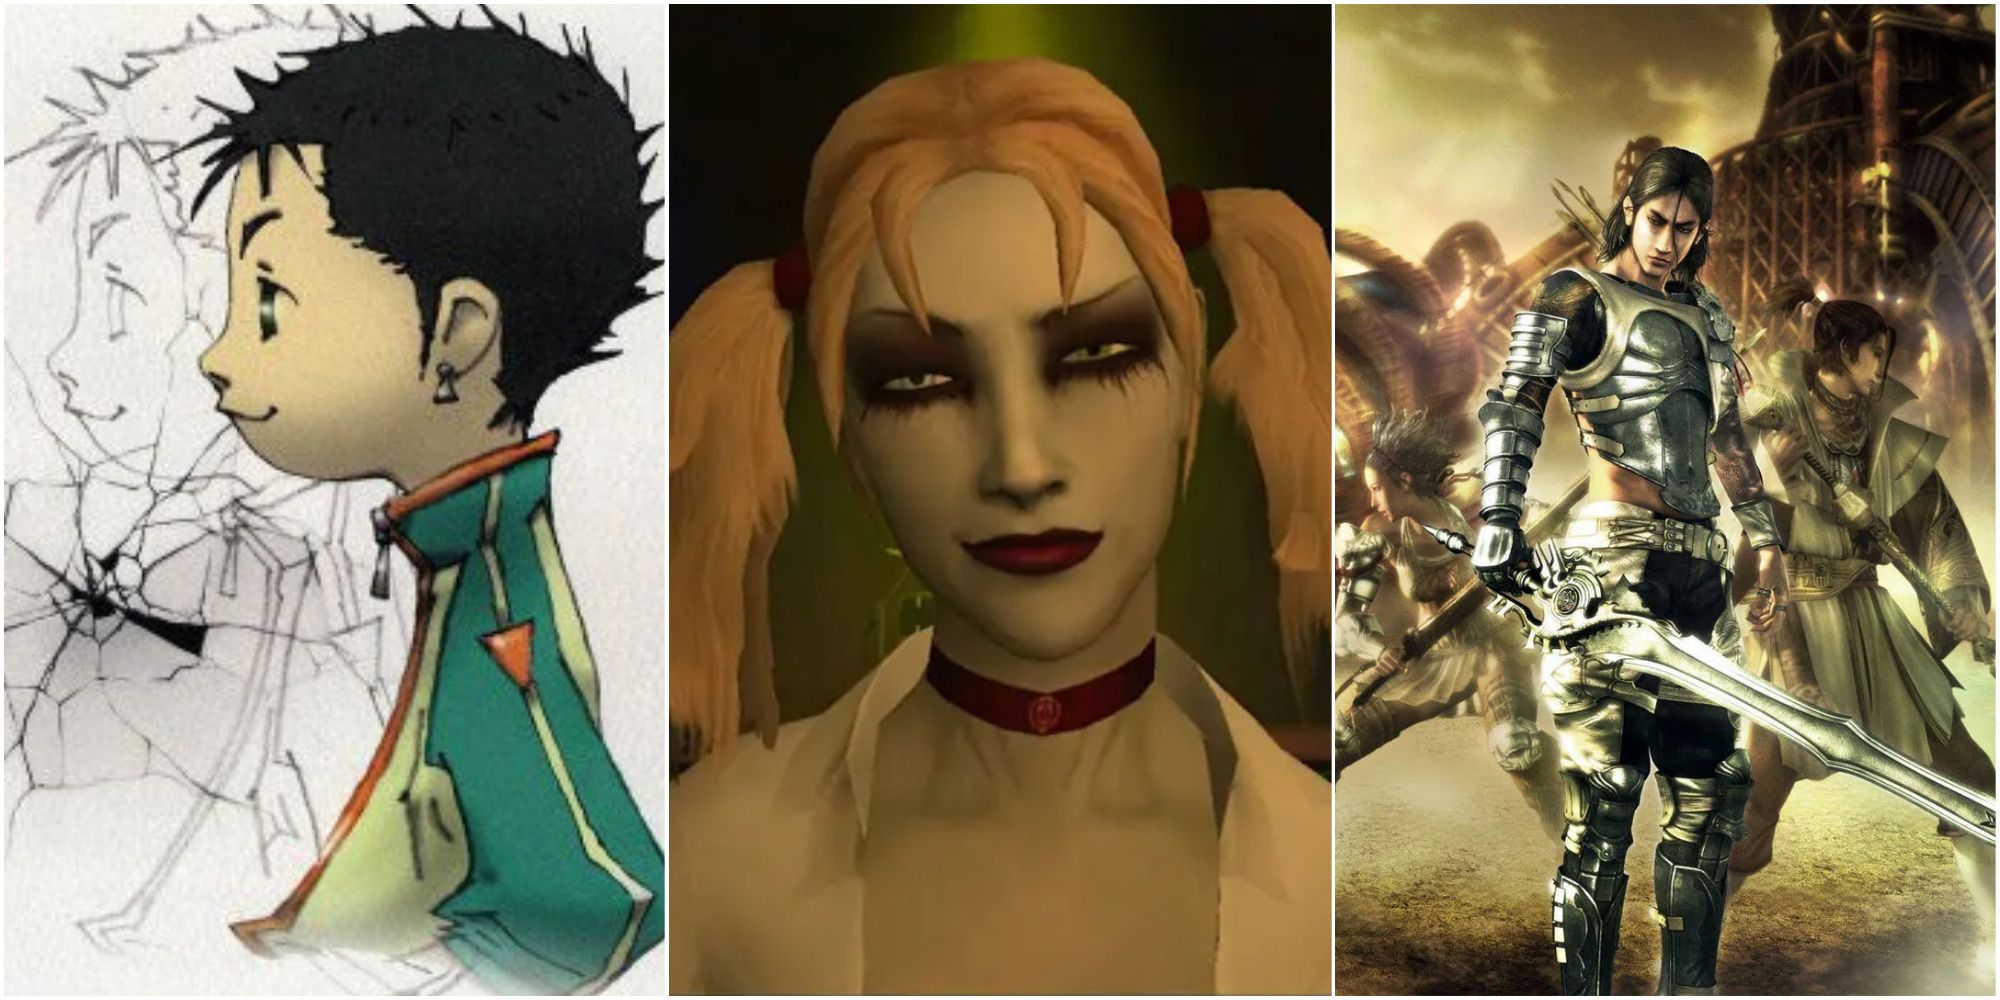 A collage of images from Contact, Vampire: The Masquerade - Bloodlines, and Lost Odyssey